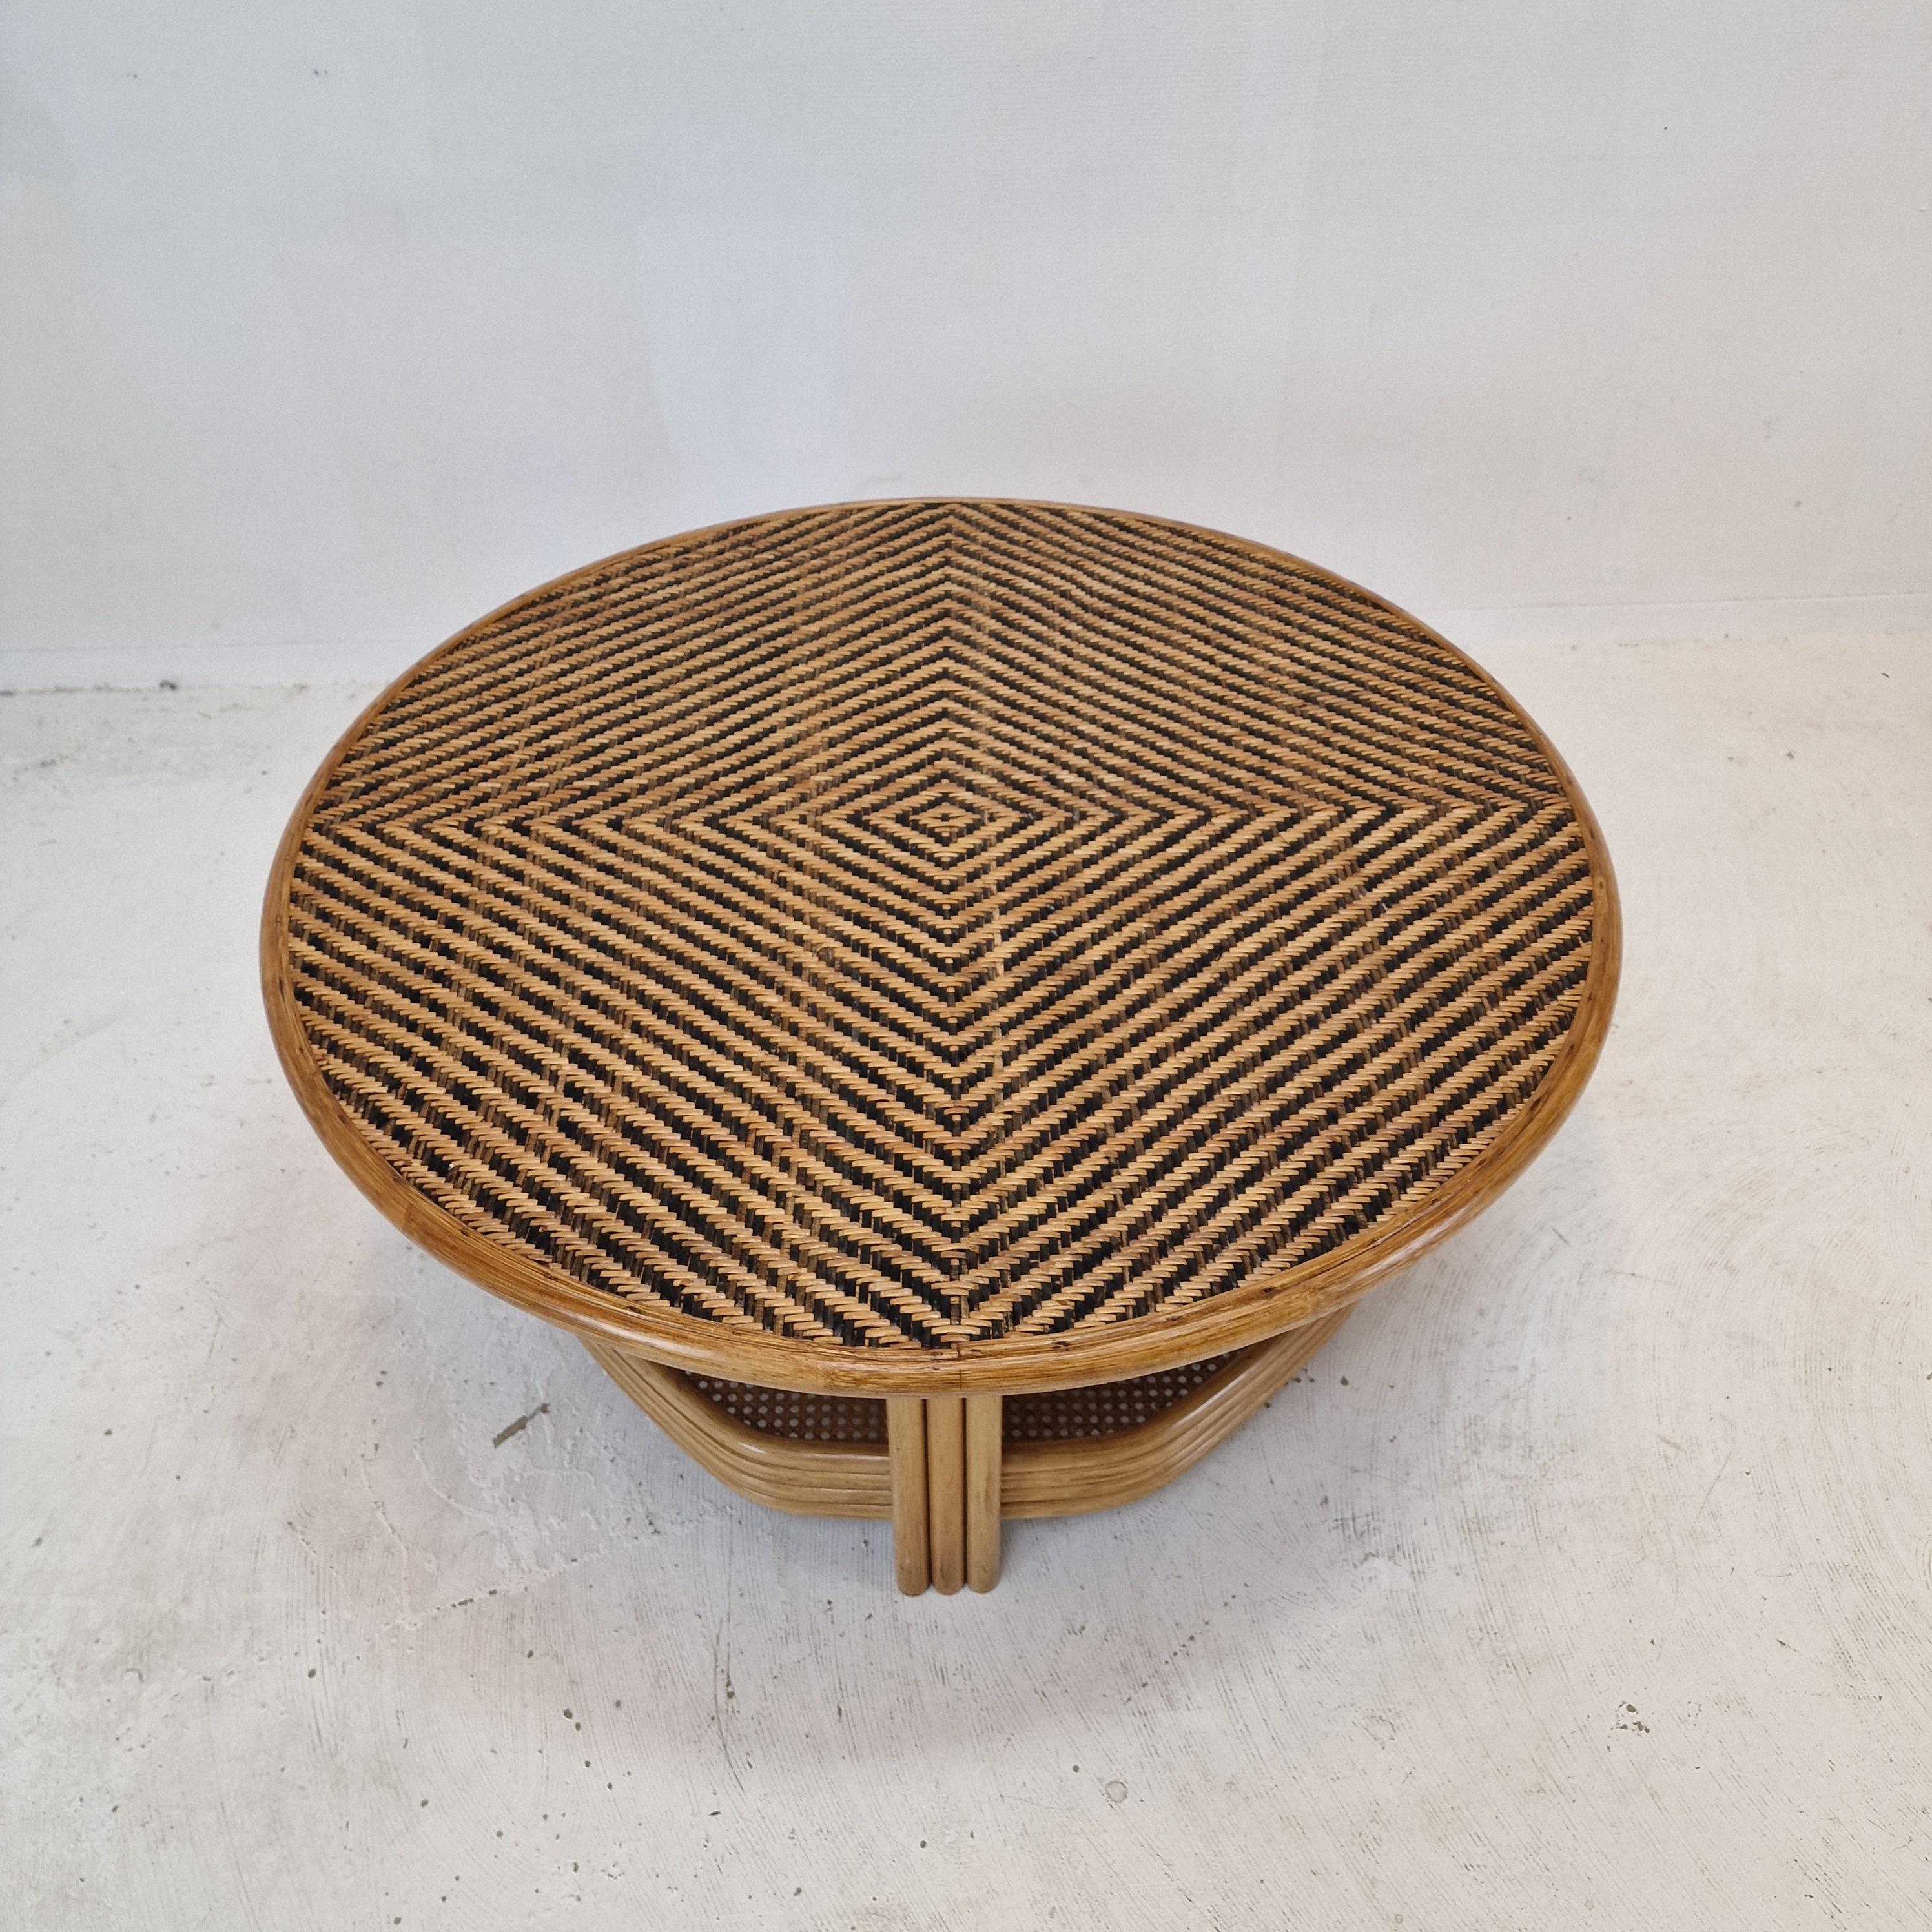 Italian Wicker and Rattan Coffee Table, 1970s For Sale 3